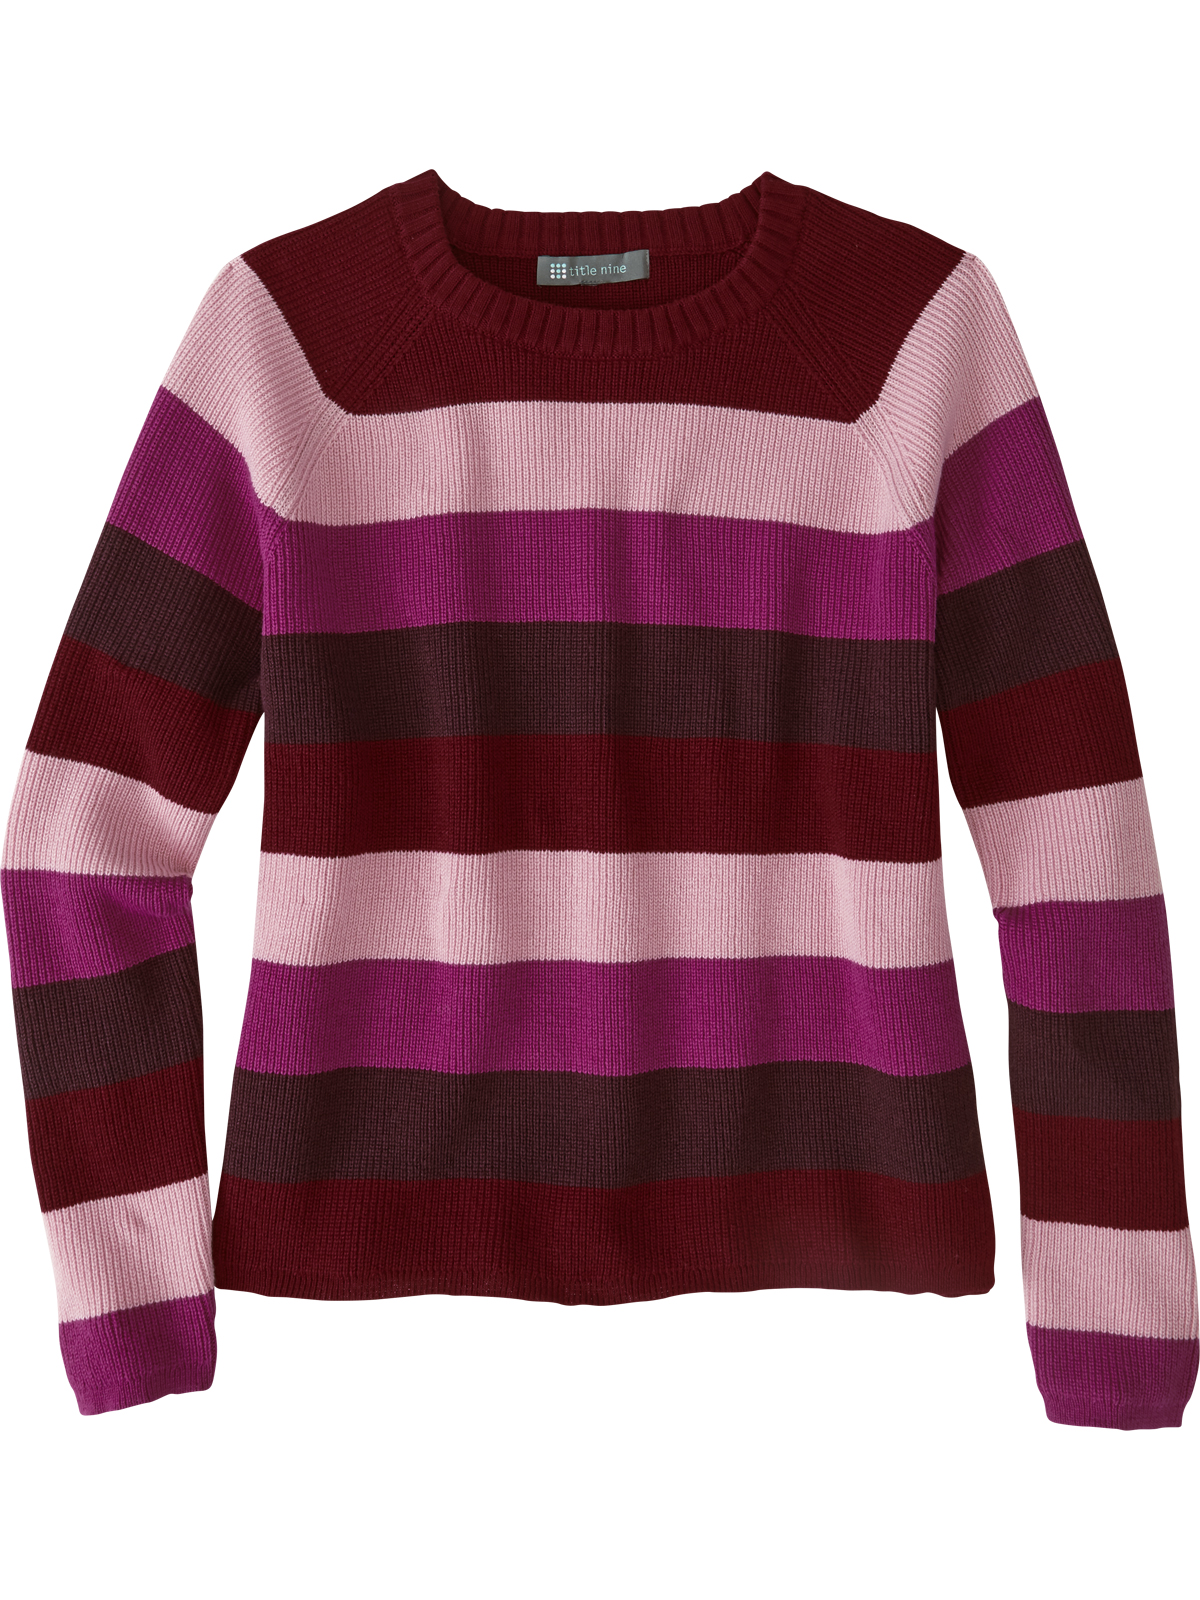 Crew Neck Sweater for Women: Title | Striped Nine Offsite